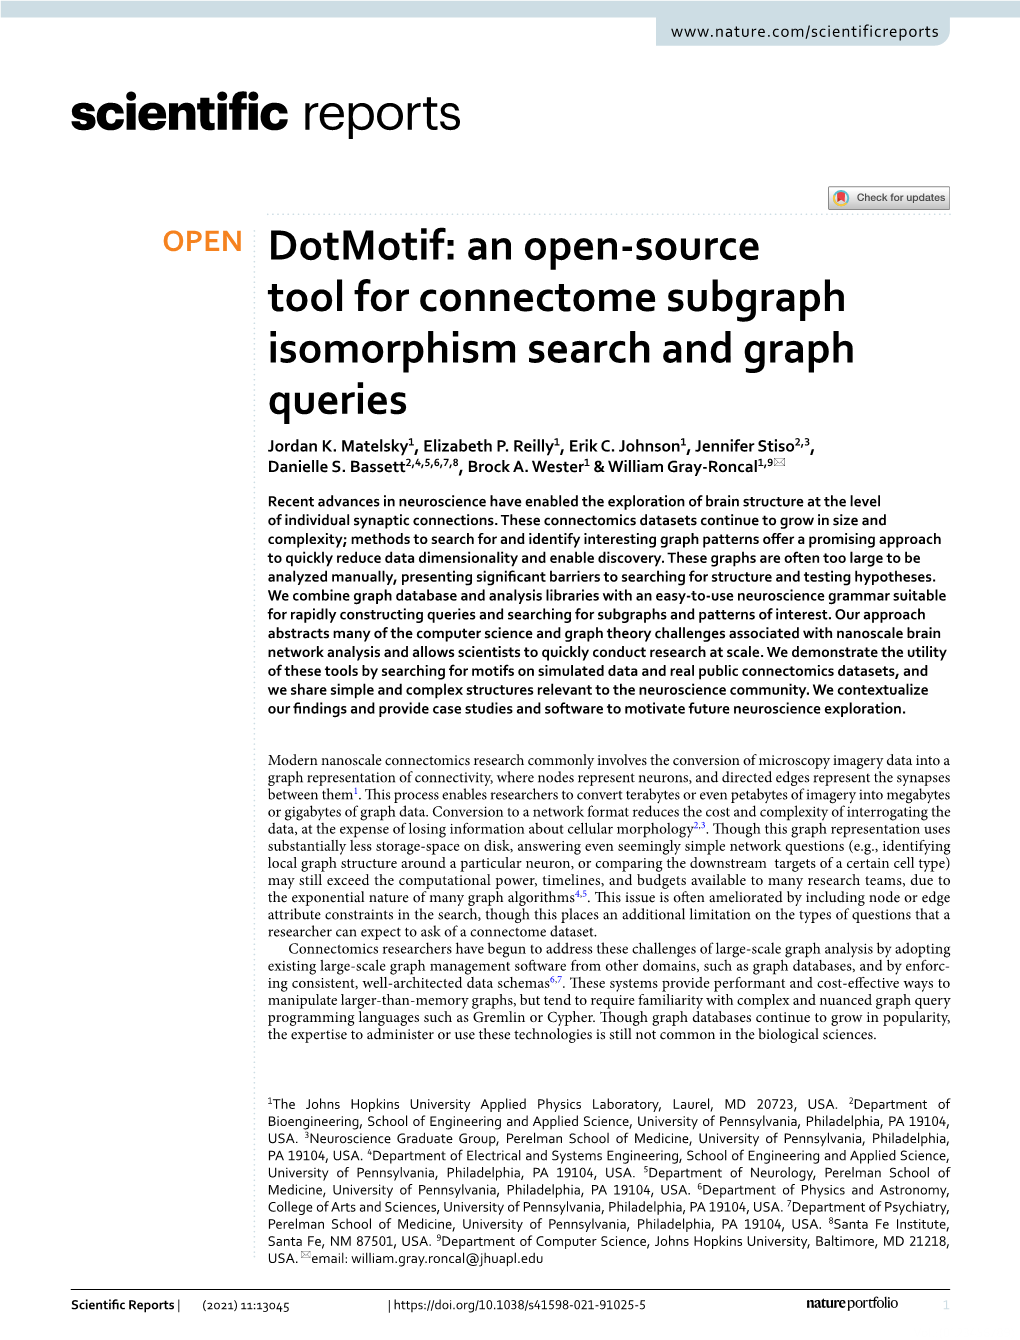 An Open-Source Tool for Connectome Subgraph Isomorphism